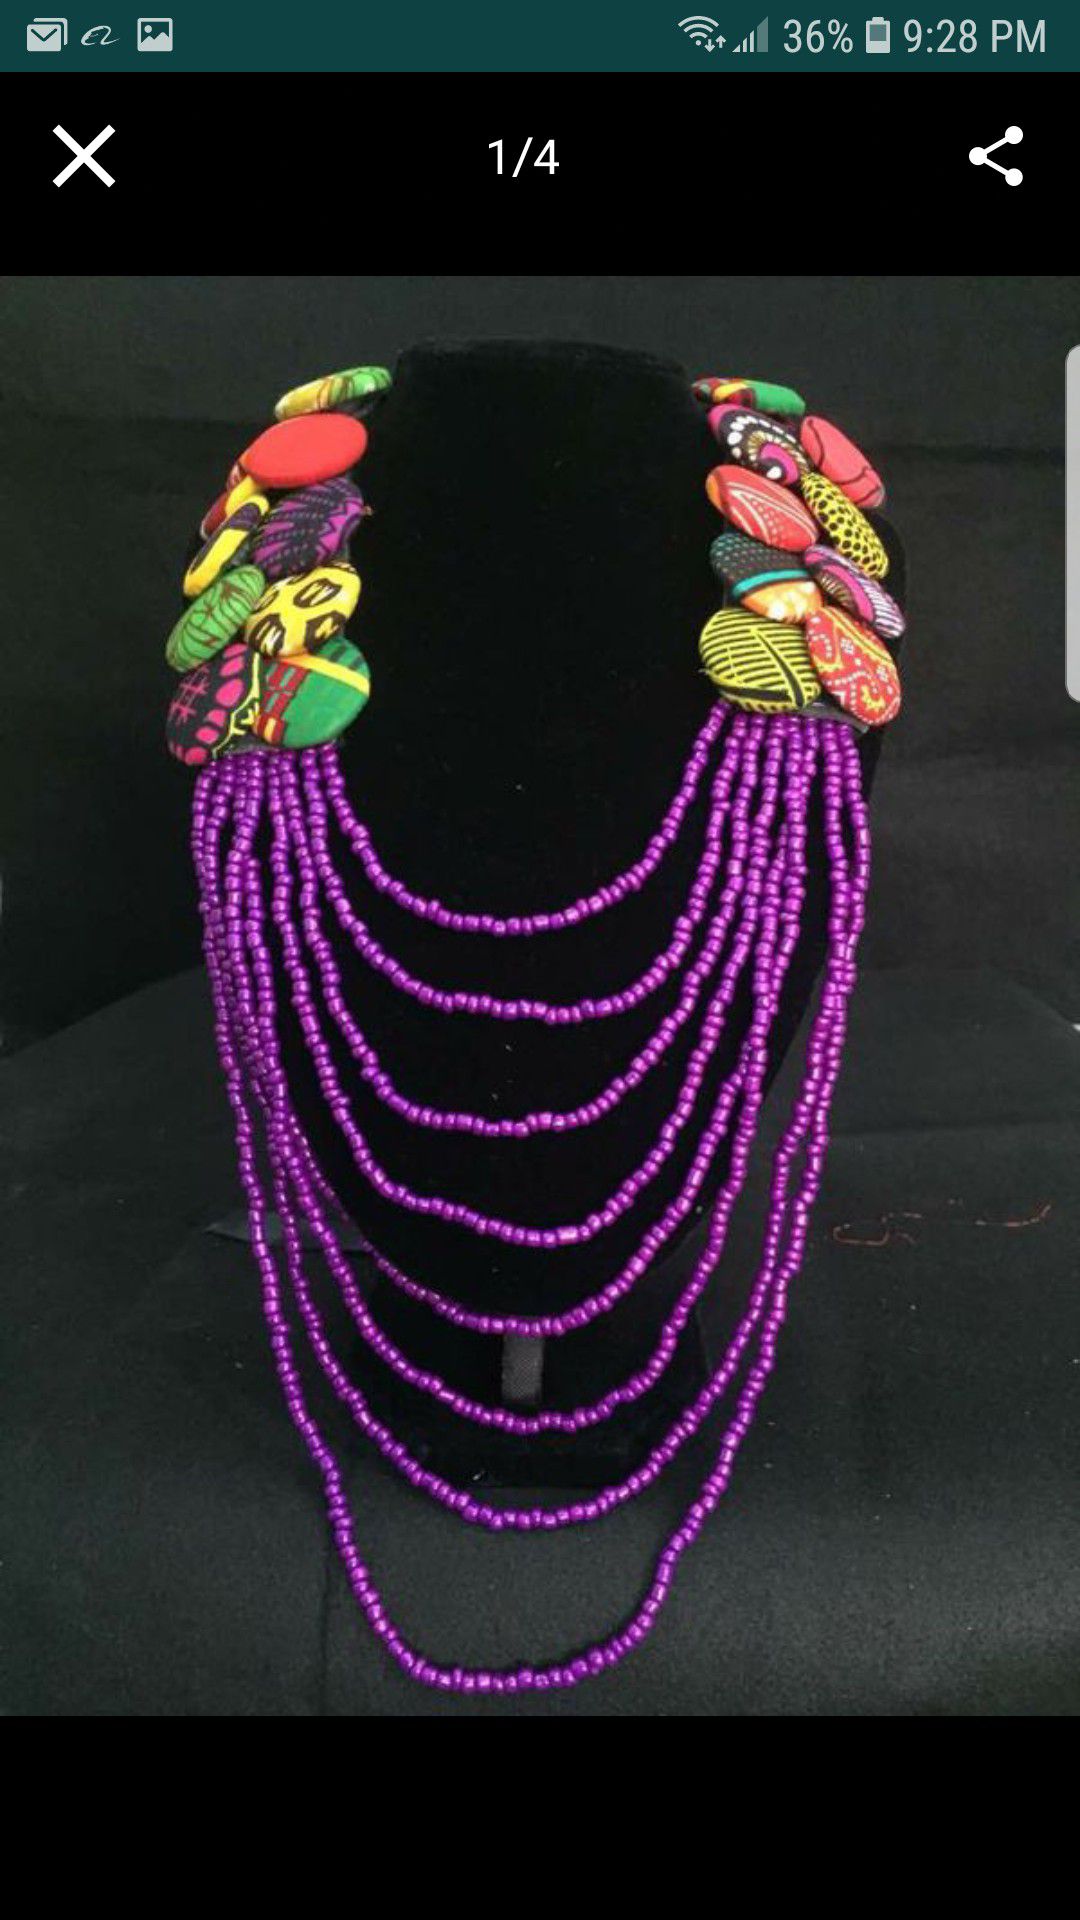 Buttons and beads necklaces